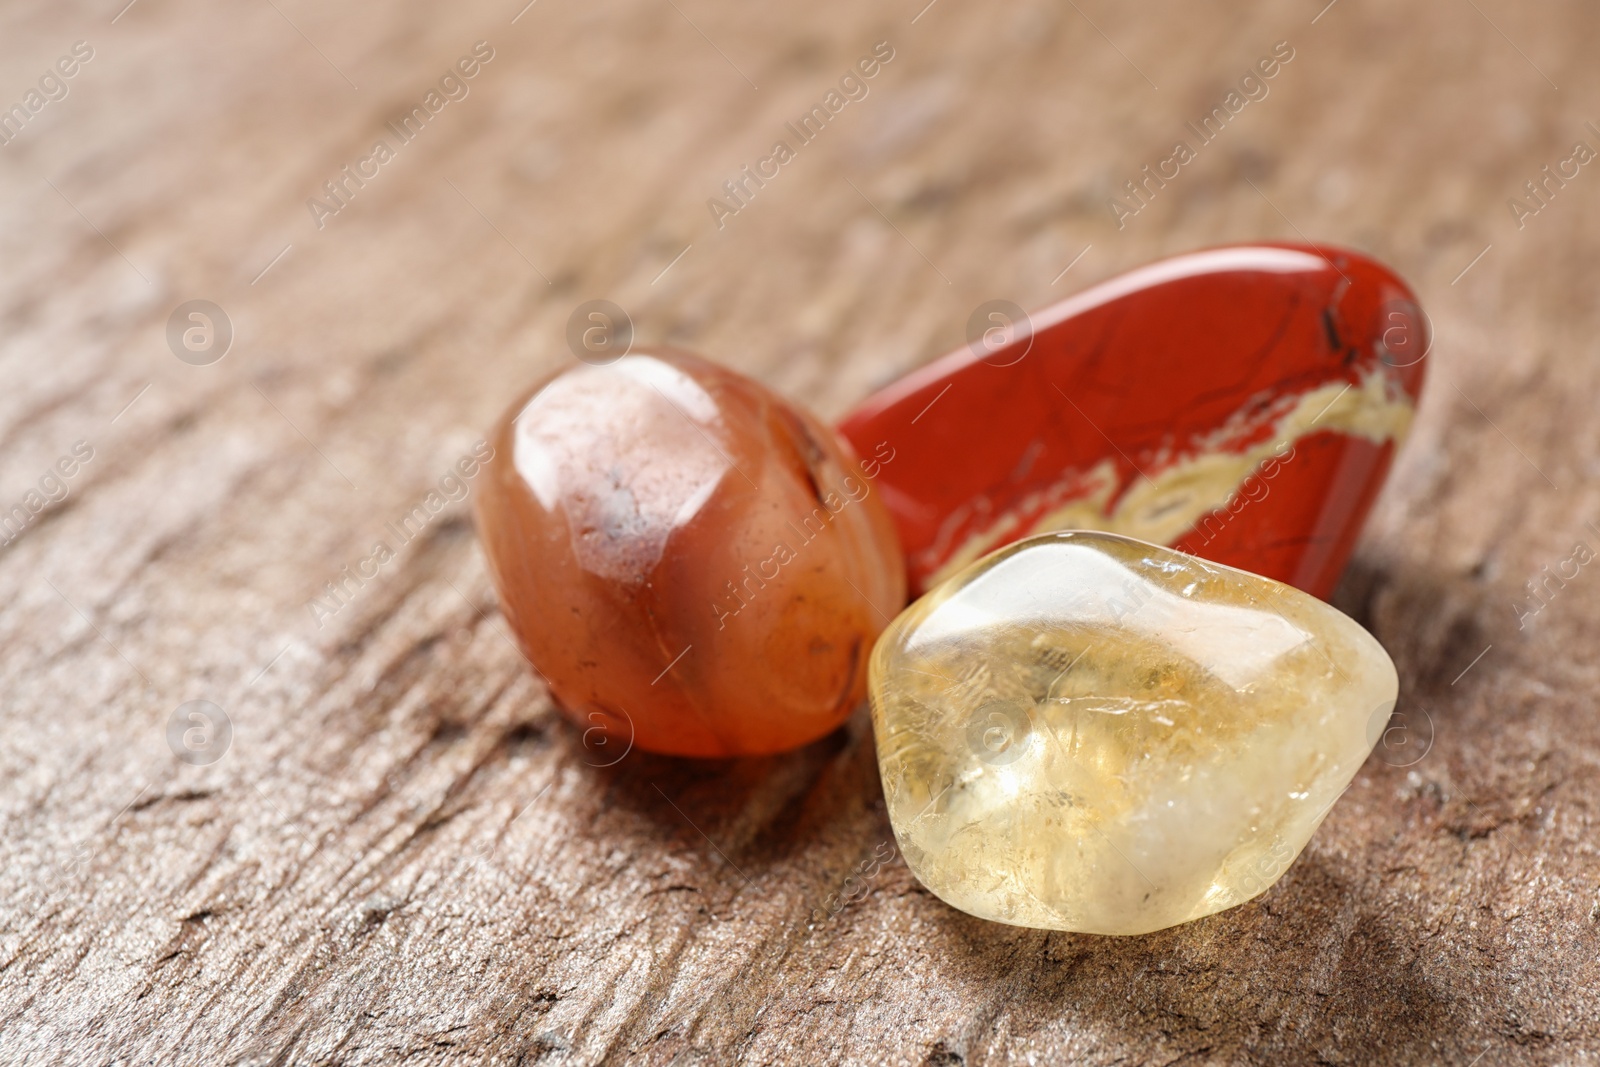 Photo of Beautiful red and white jade, carnelian agate and citrine quartz gemstones on textured surface